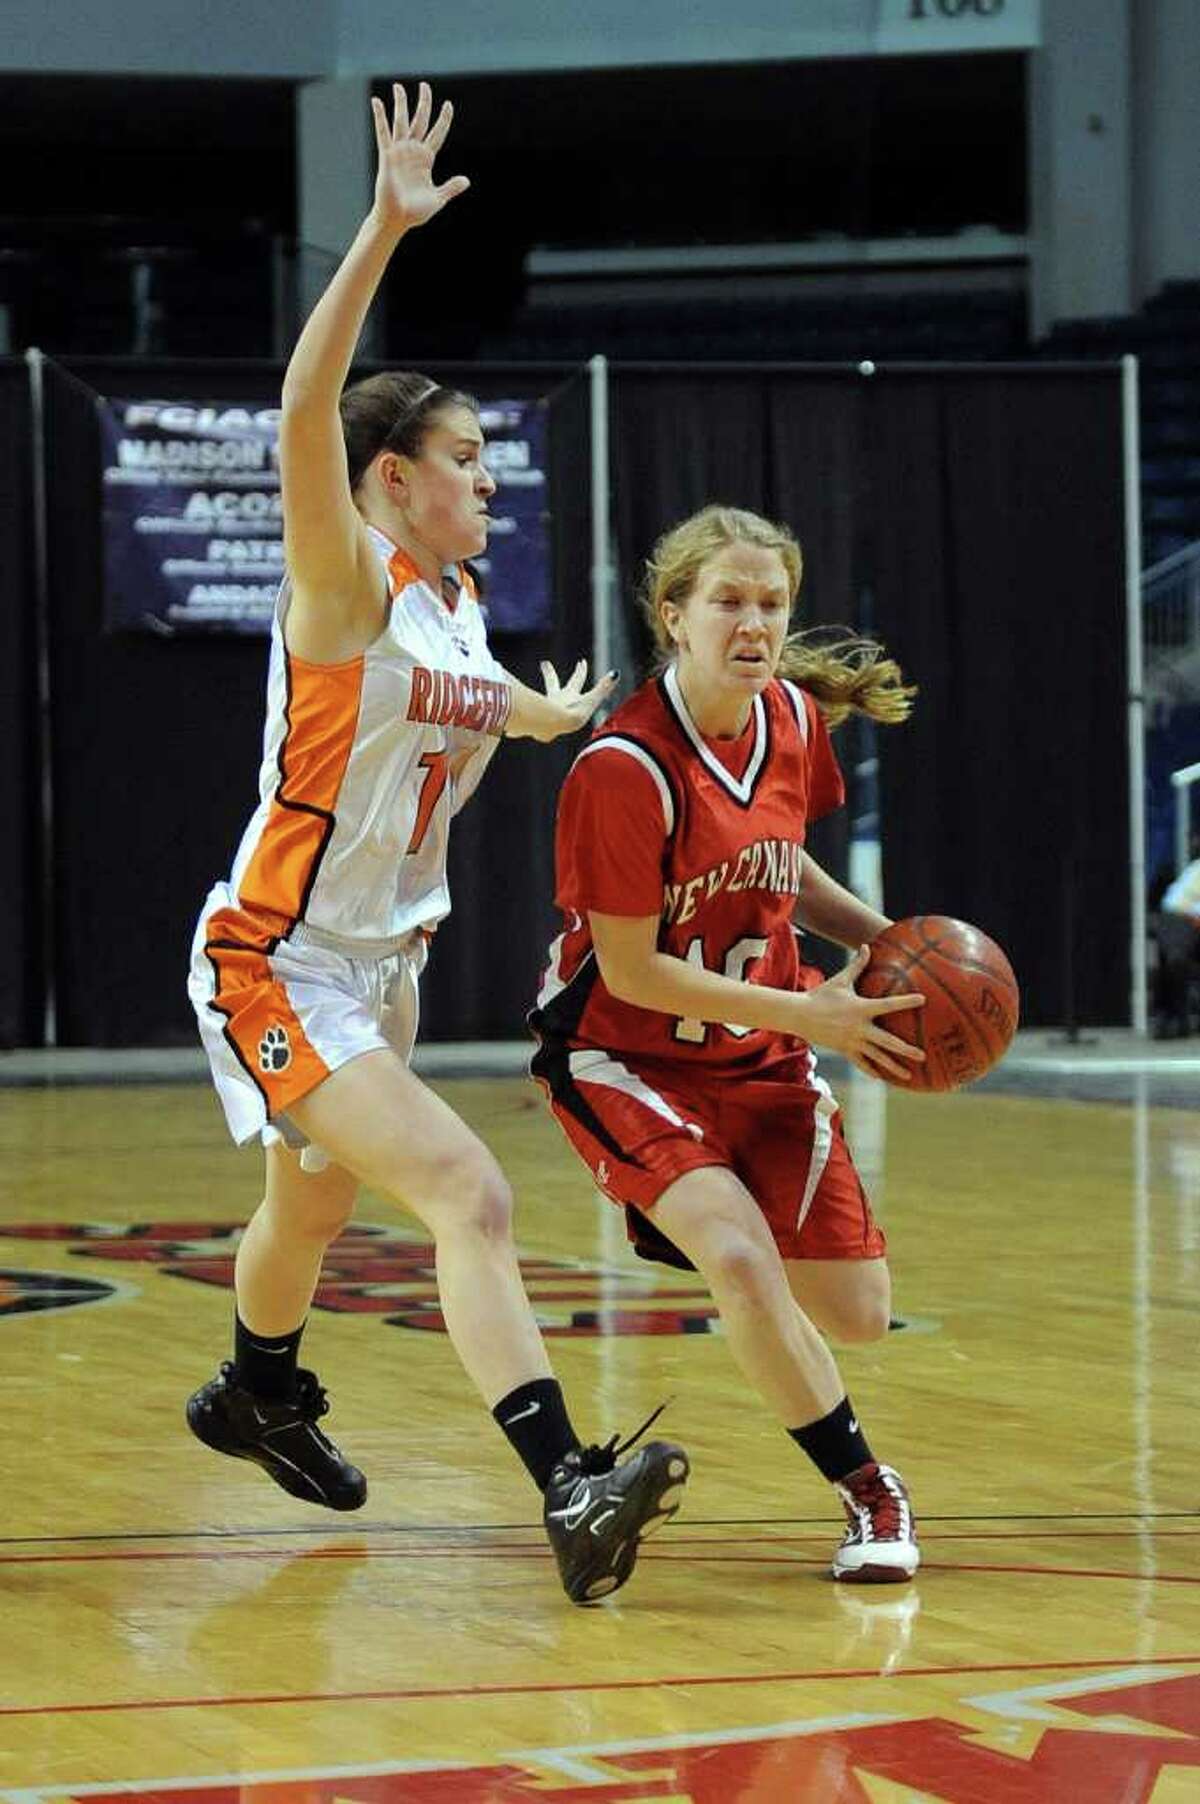 New Canaan's Sara Mannelly dribbles past Ridgefield's Kathryn Cholko during Tuesday's FCIAC girls basketball semifinal game at the Webster Bank Arena at Harbor Yard on Feburary 22, 2011.